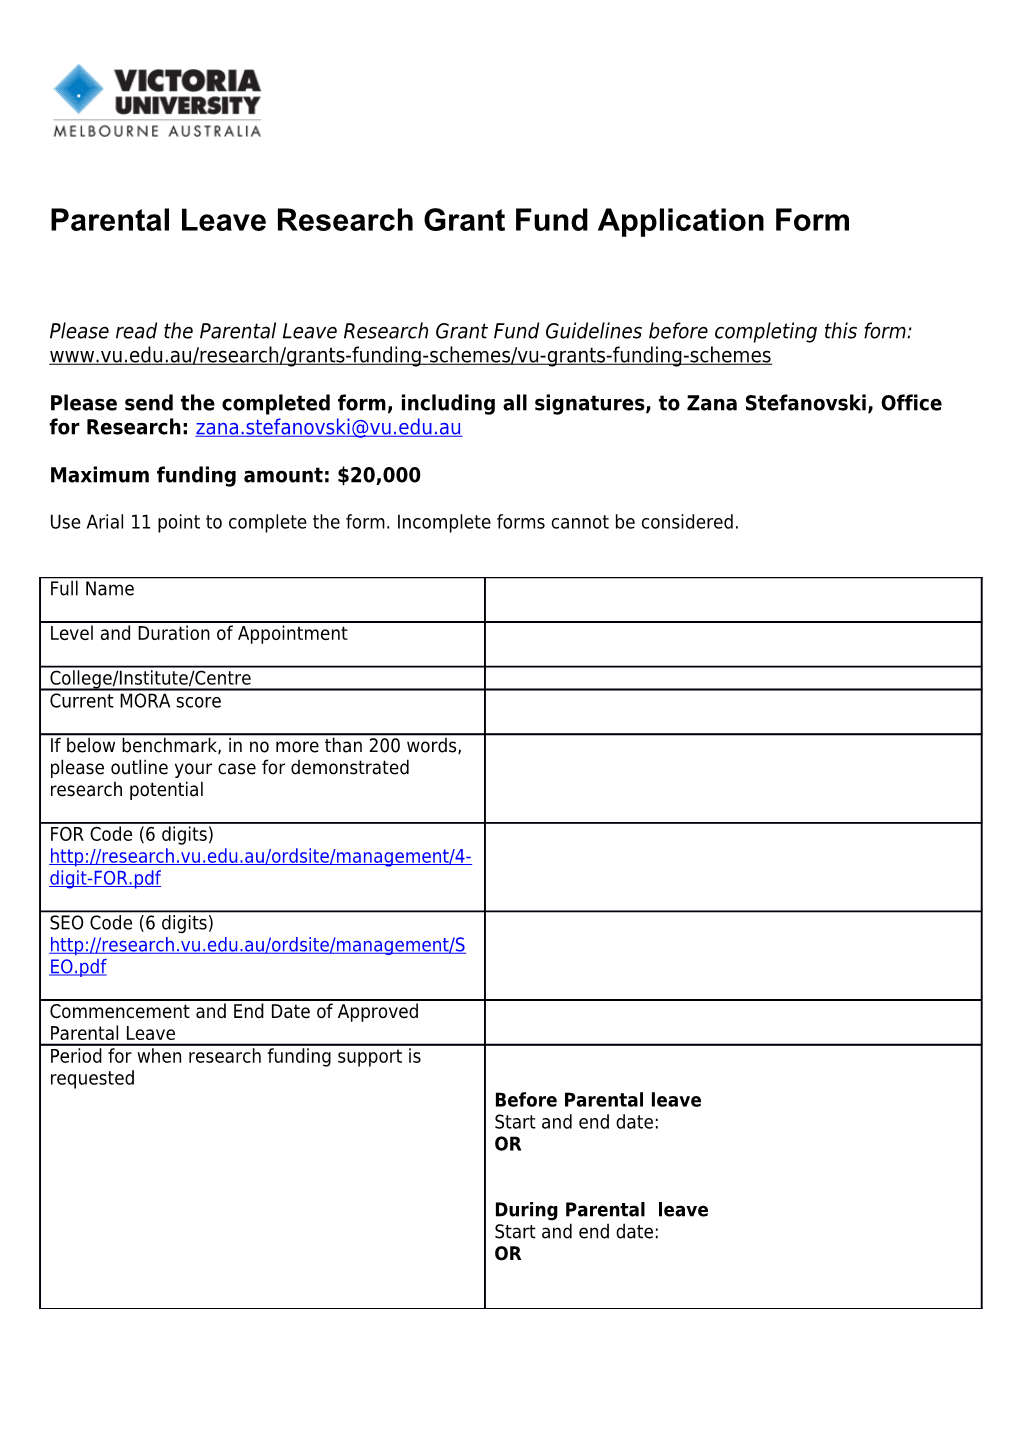 Parental Leave Research Grant Fund Application Form